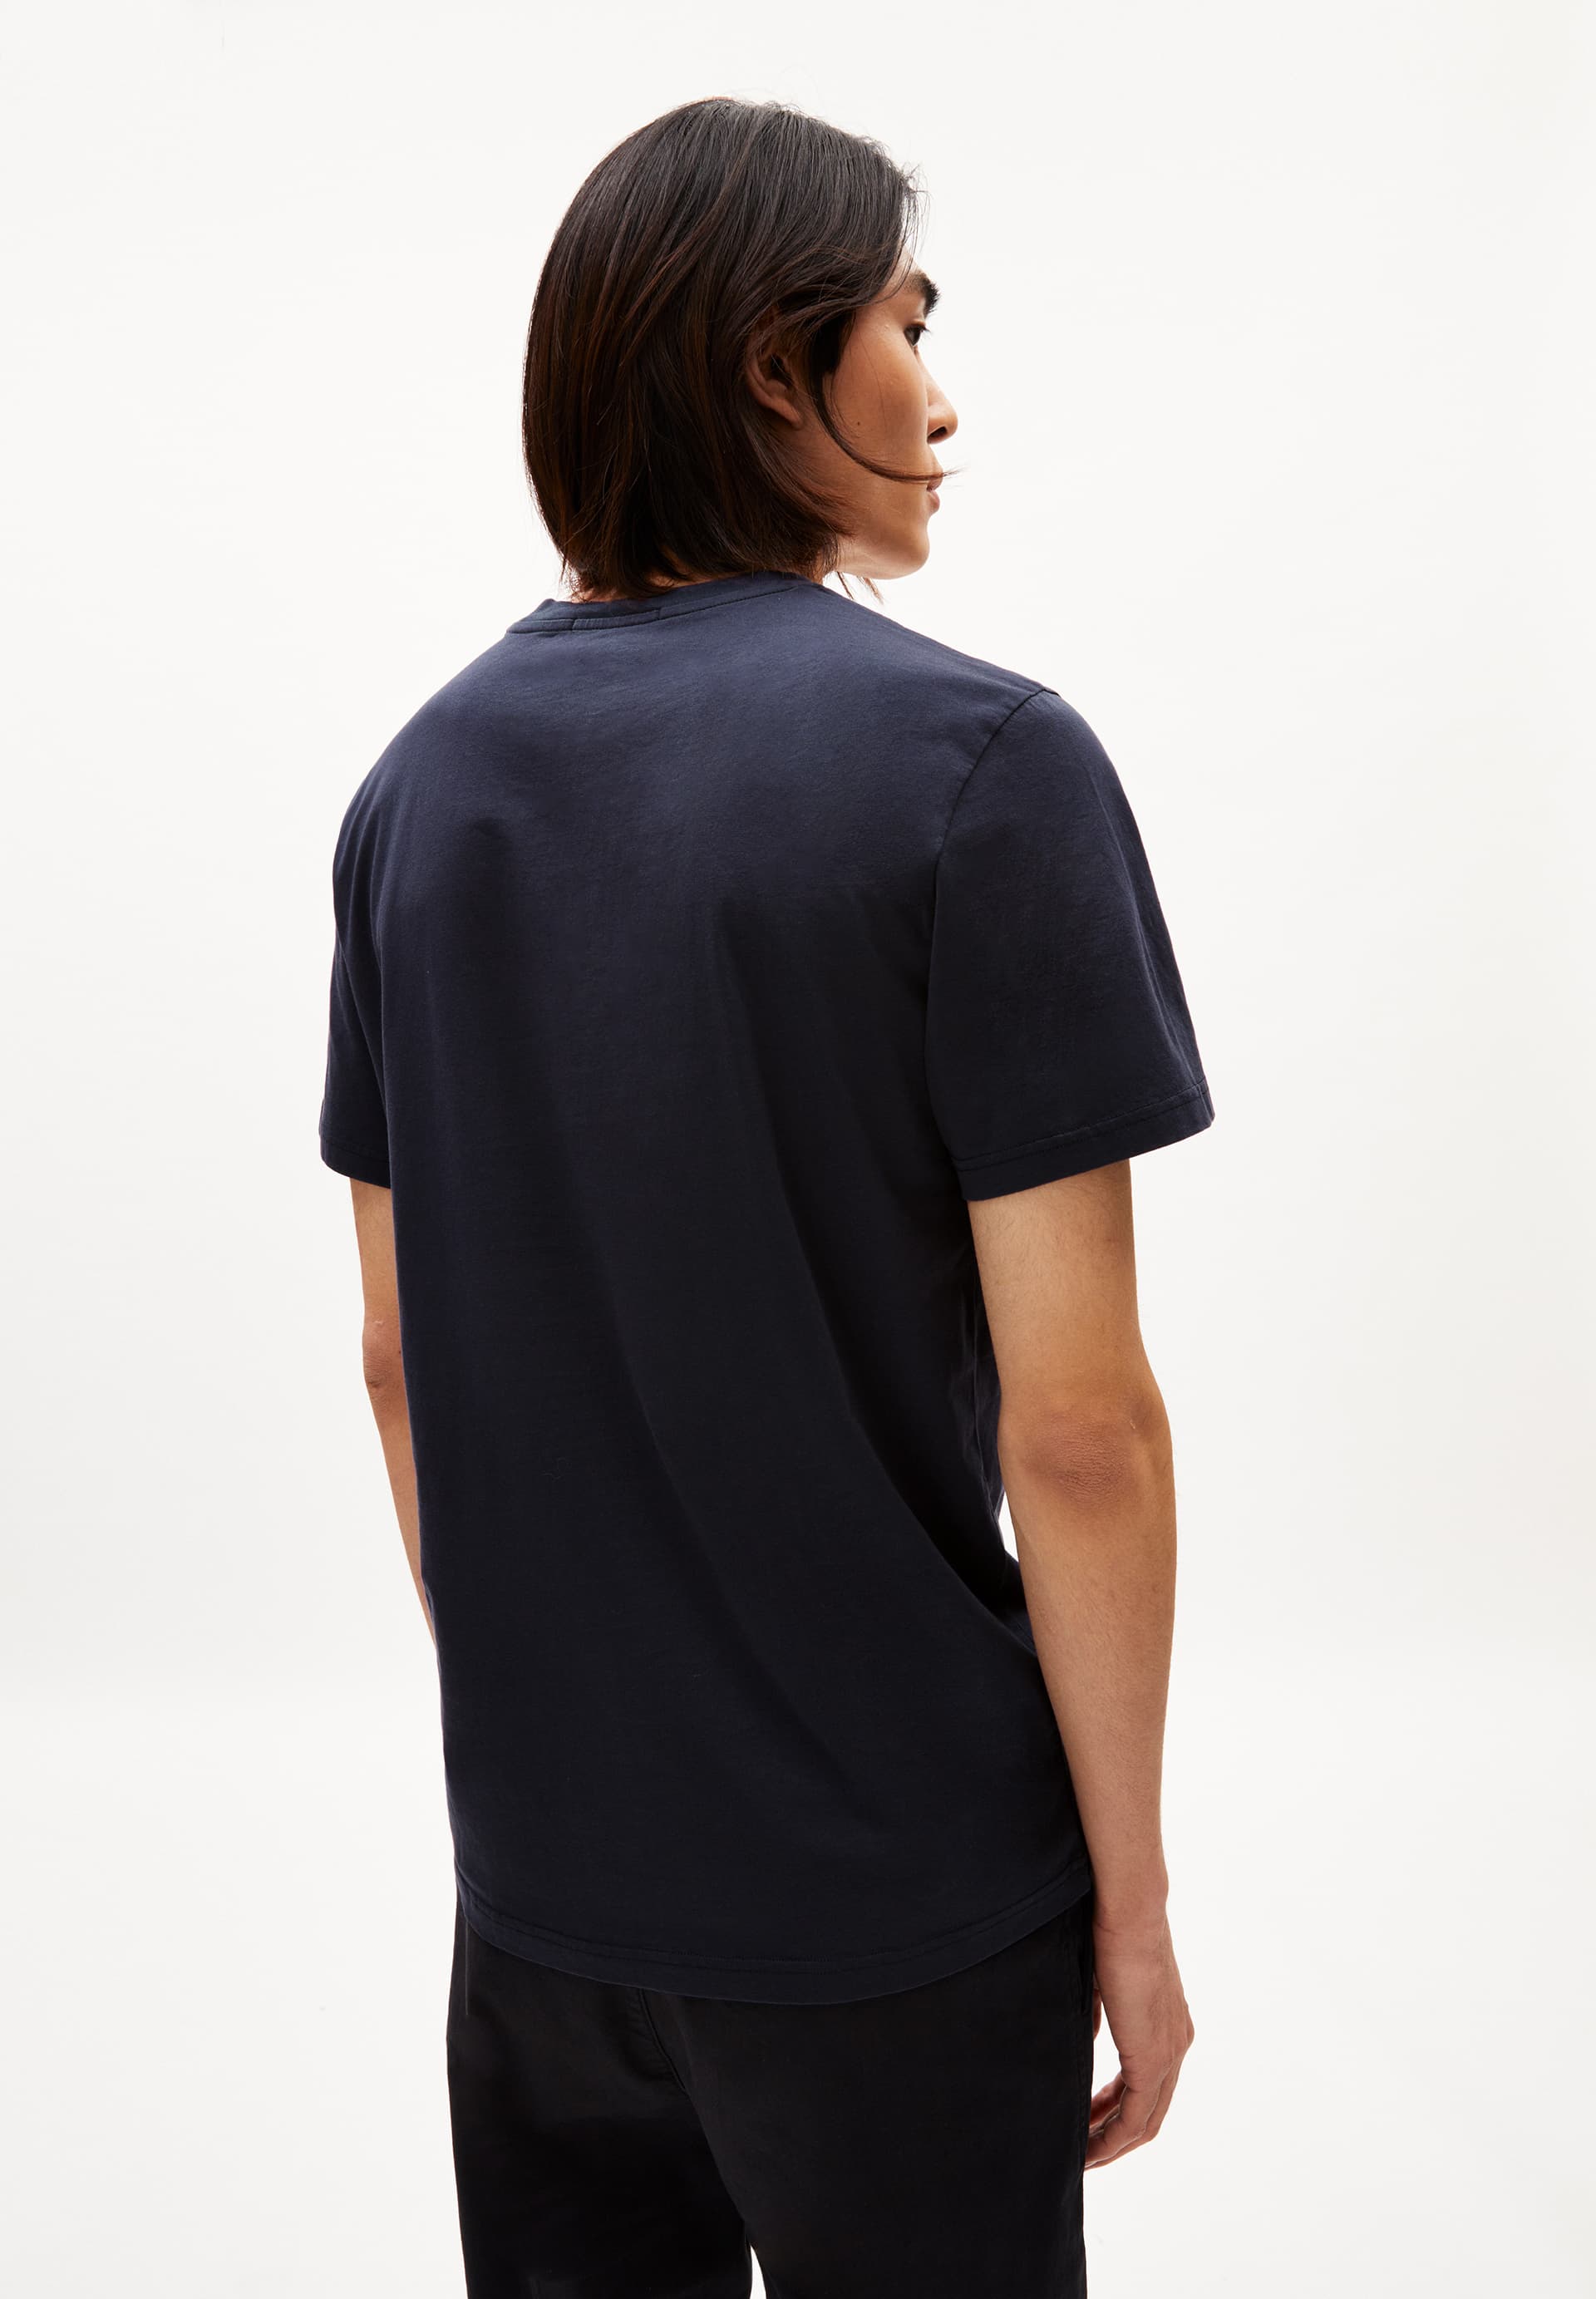 AADONI STICKAA T-Shirt Relaxed Fit made of Organic Cotton